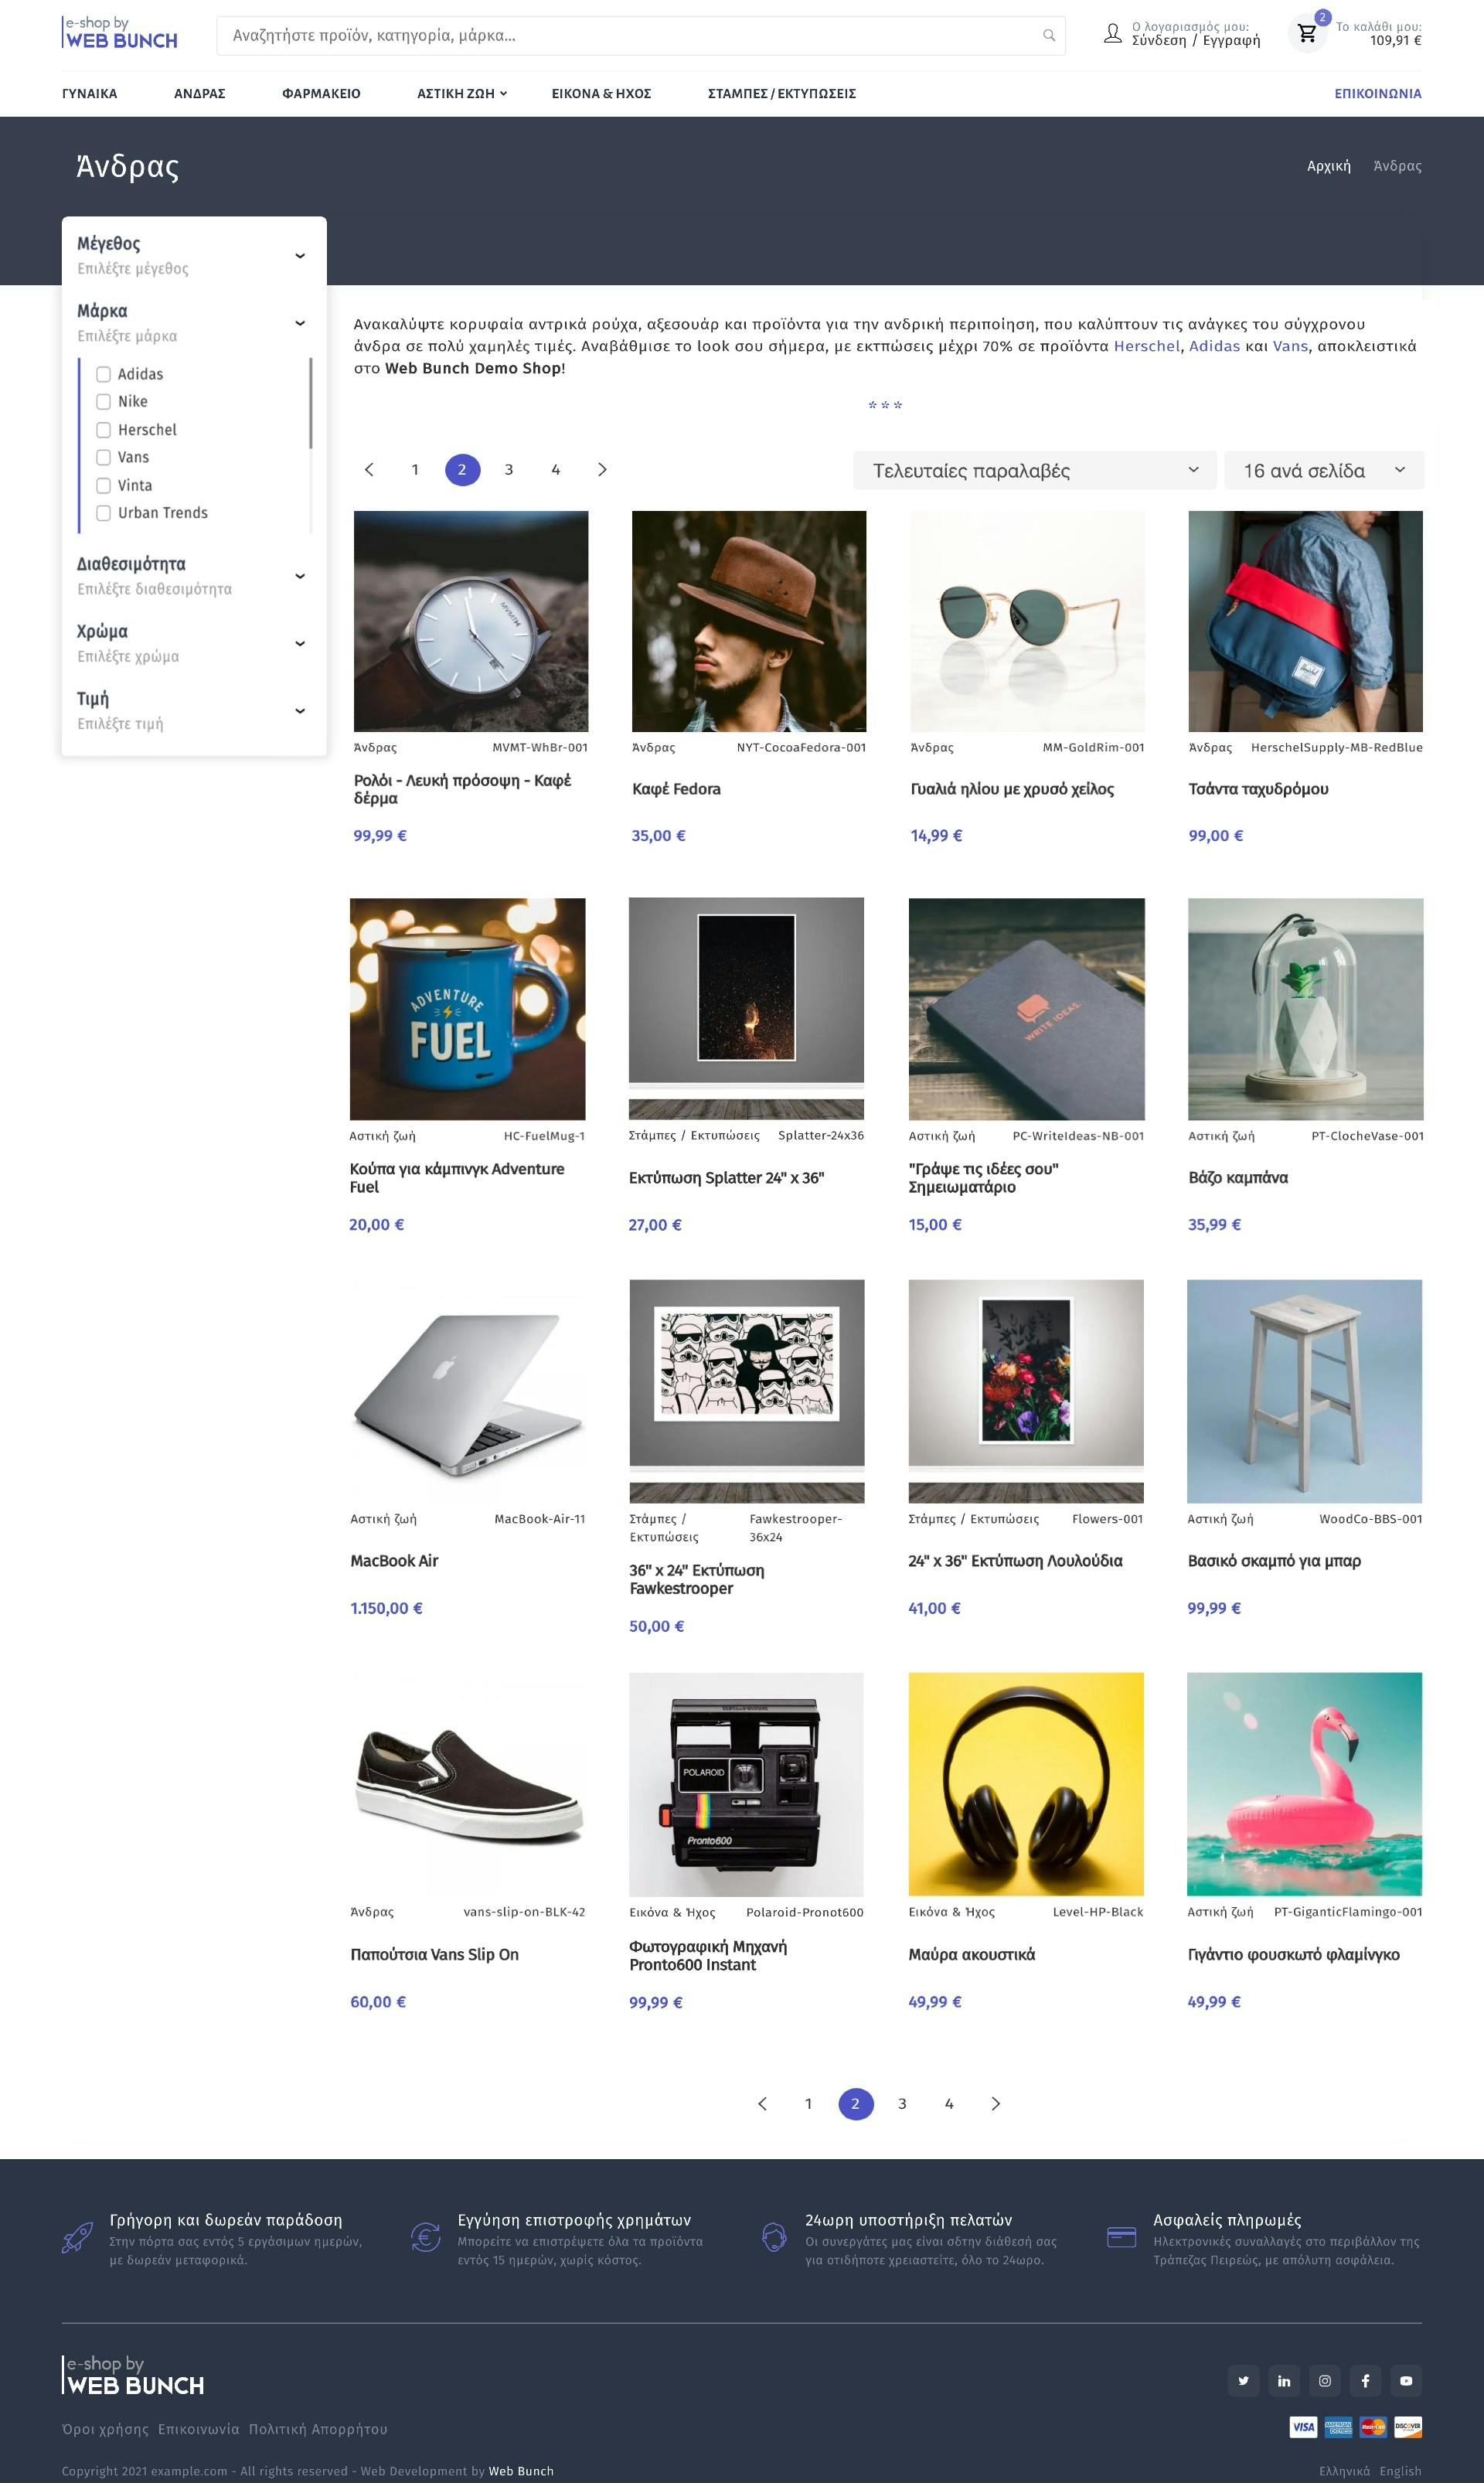 Web Bunch Demo Shop - Category Page